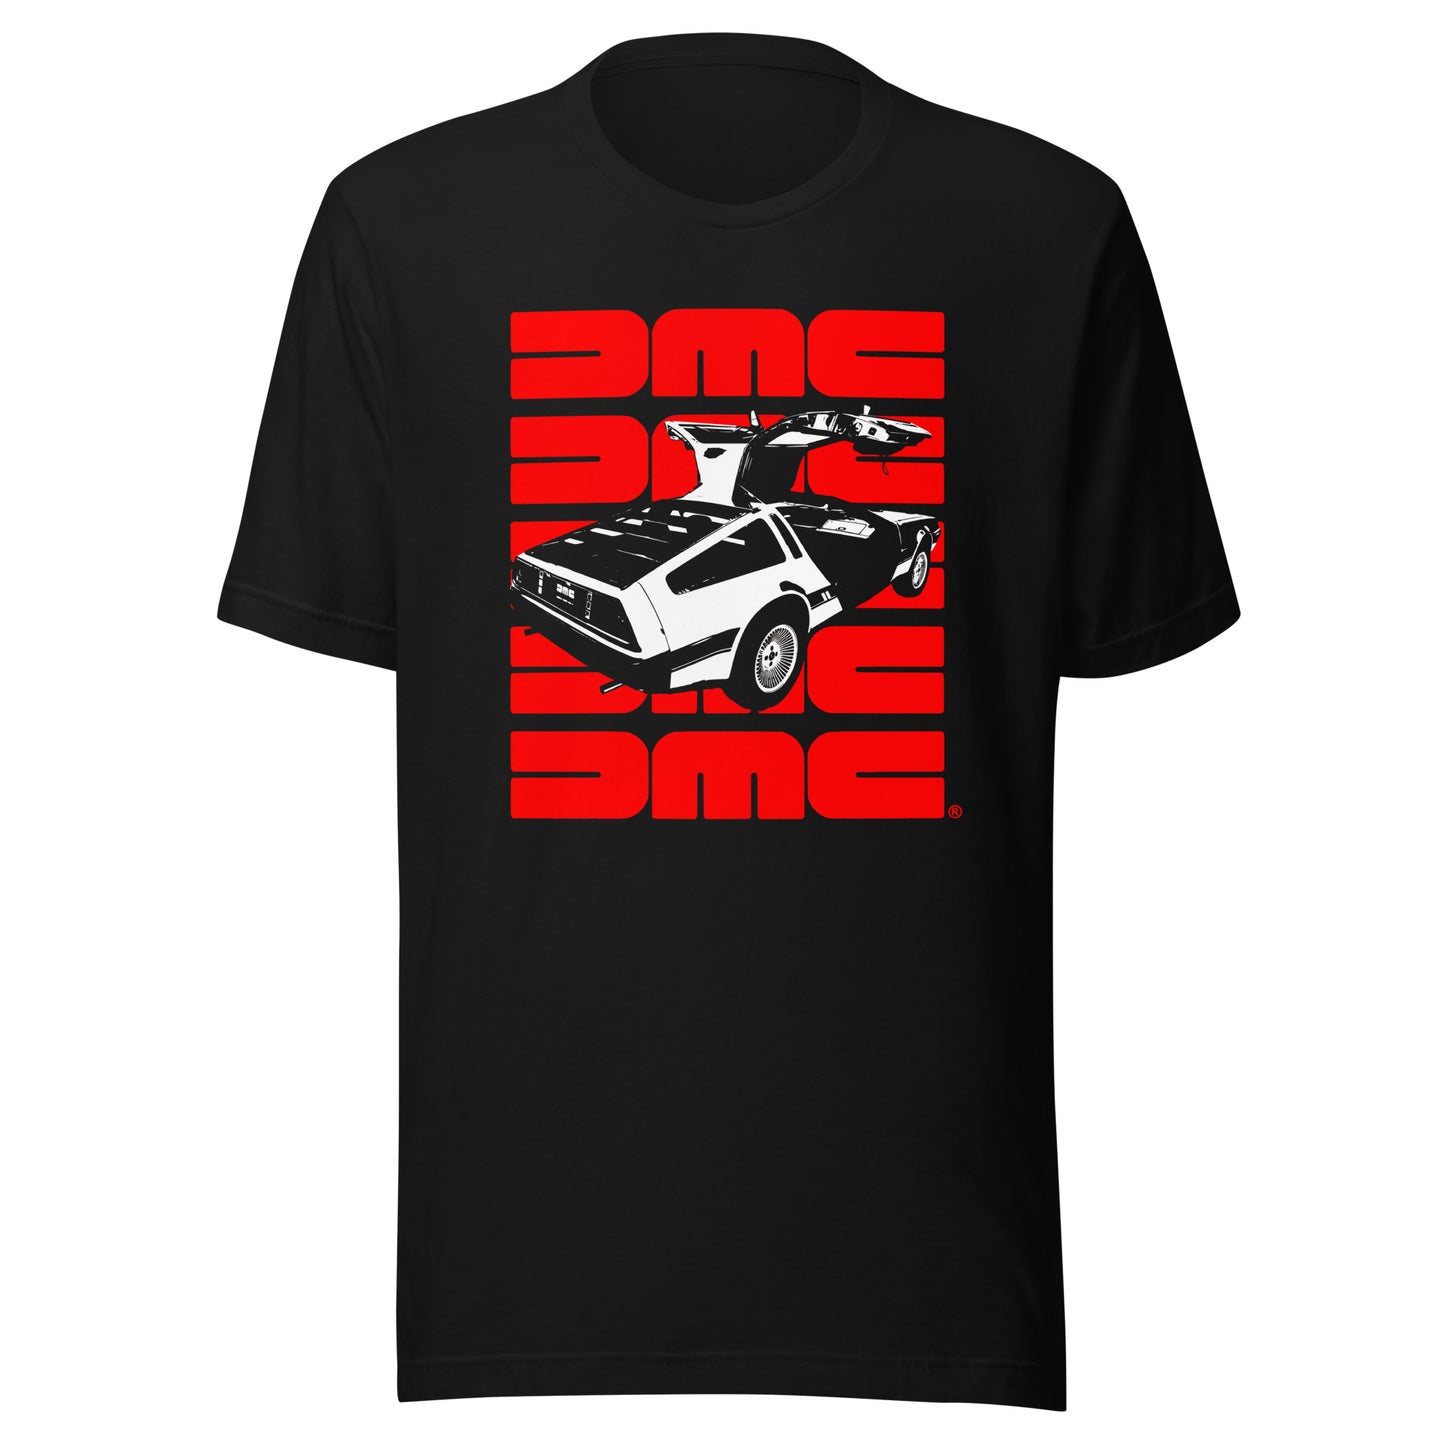 June Black, White, and Red All Over (Blackout Edition) T-shirt